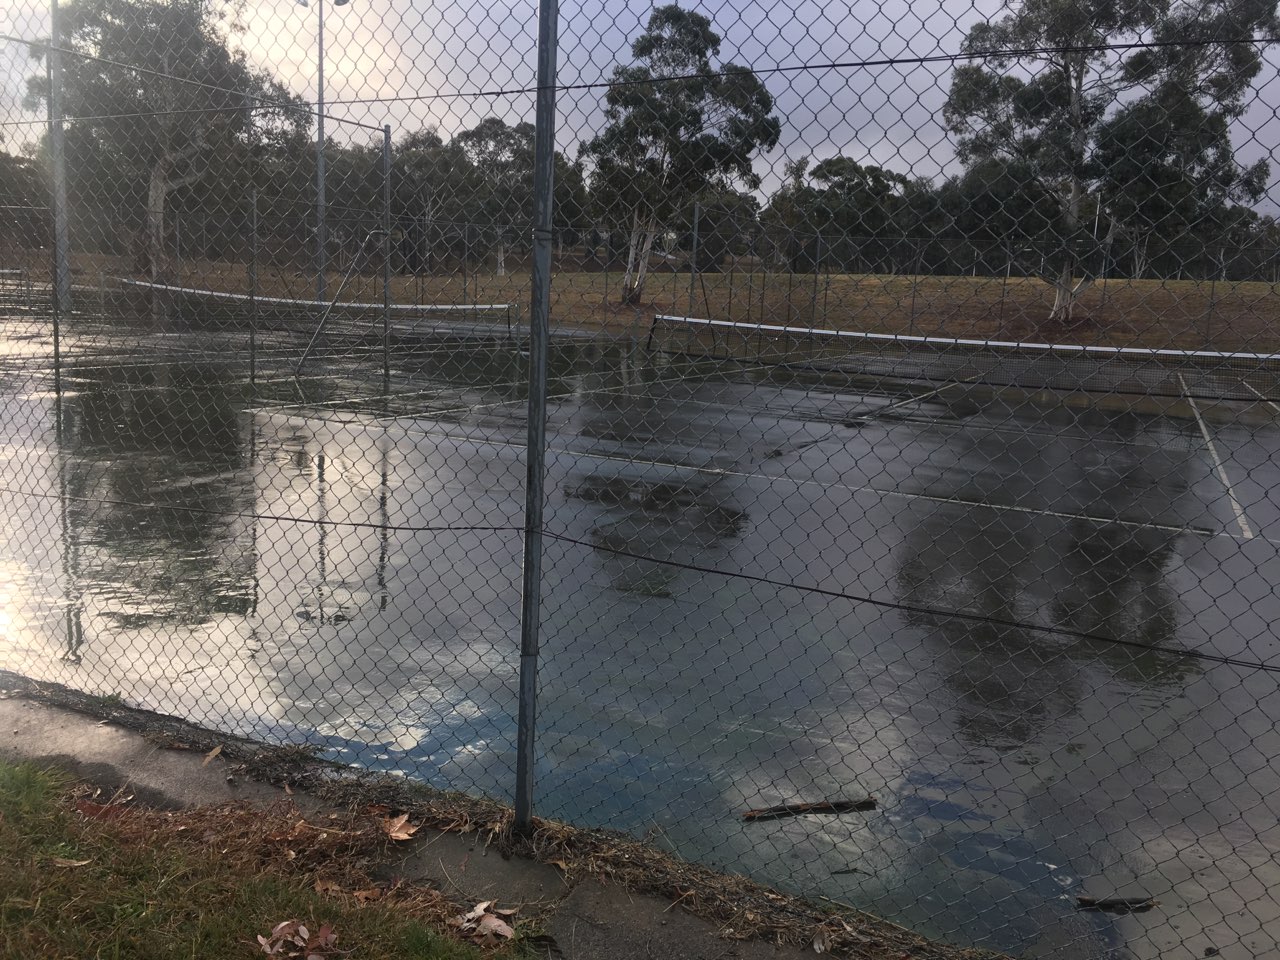 Erindale Active Leisure Centre - Wet Weather - June 15th 2018